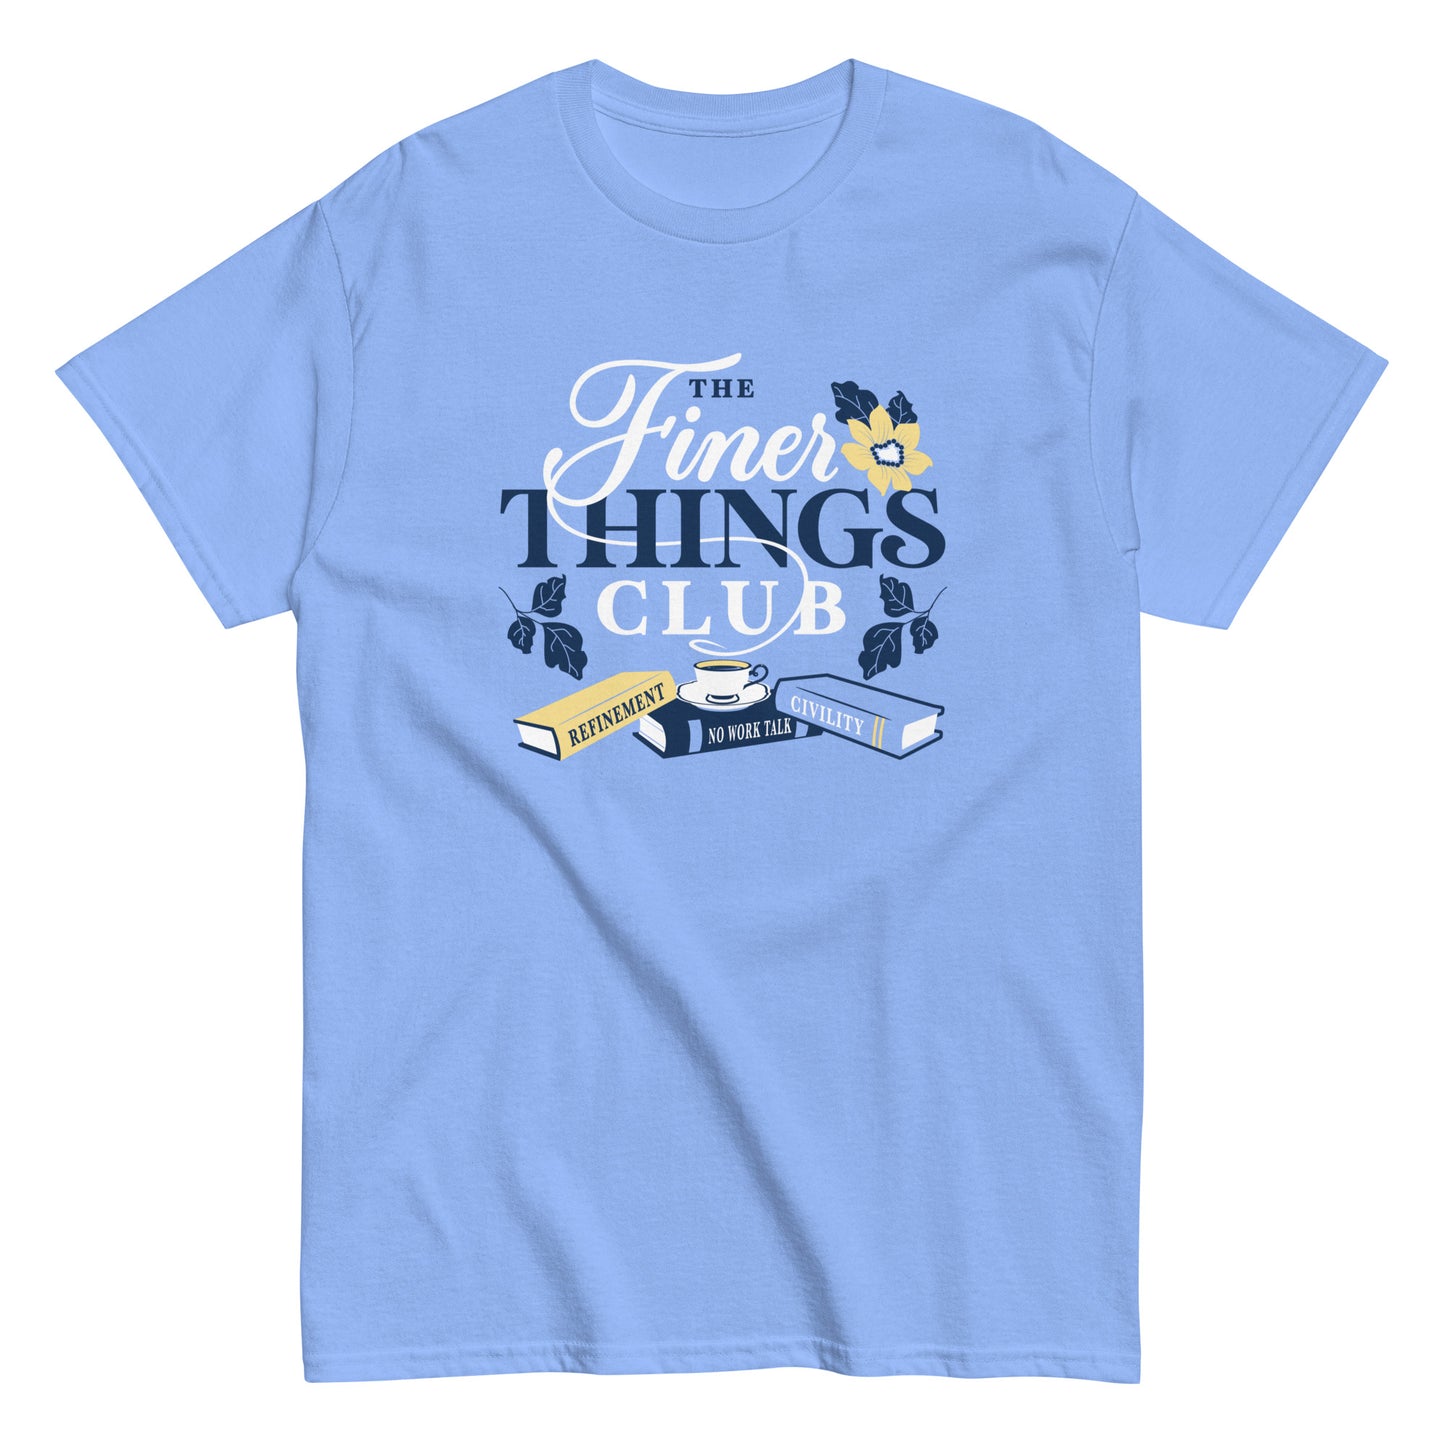 The Finer Things Club Men's Classic Tee